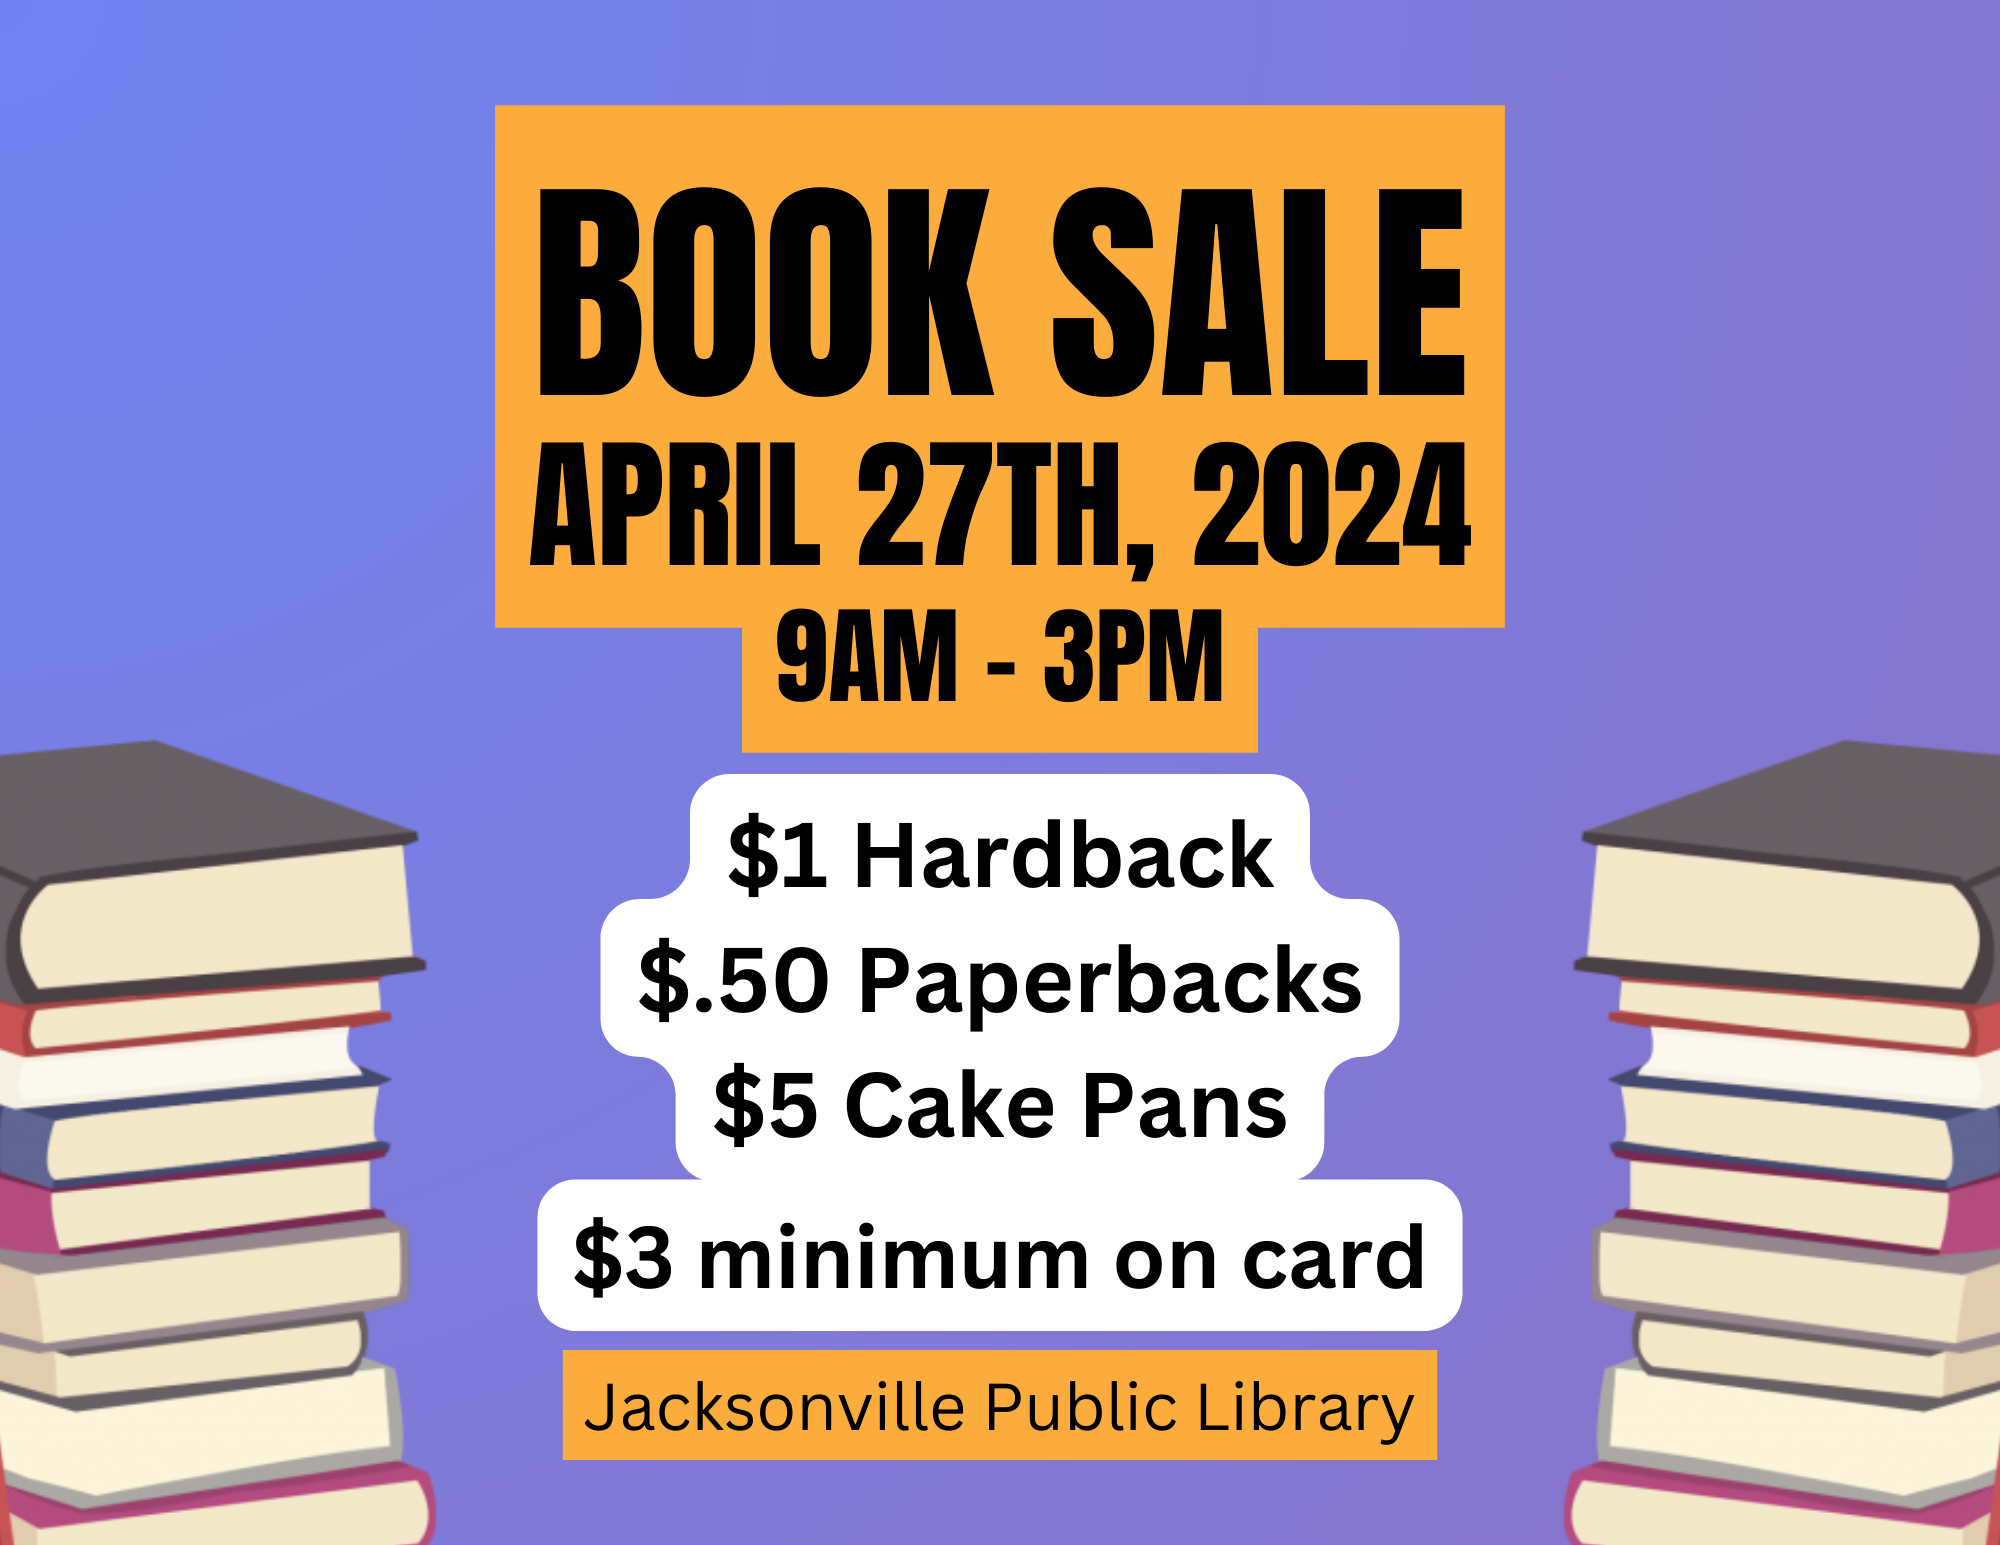 Our Book Sale is coming up! Come by 4/27 @ 9am-3pm to find some new reads!